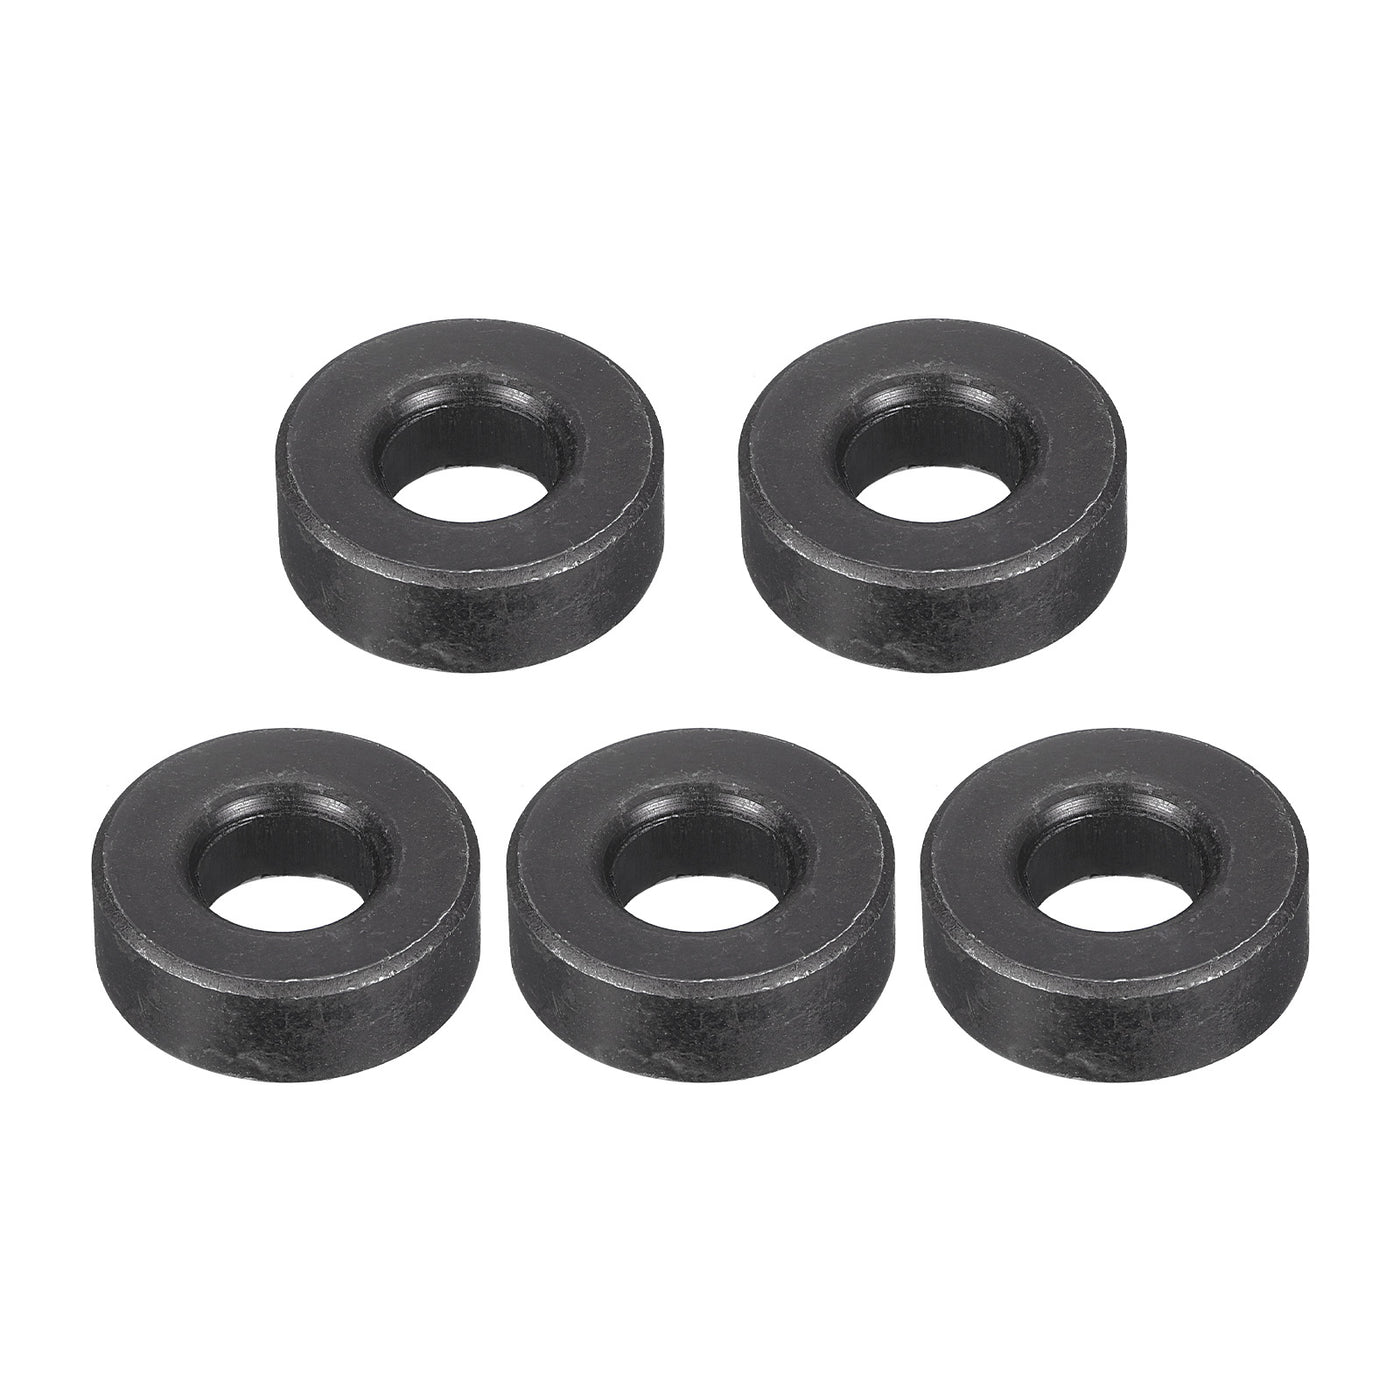 uxcell Uxcell M12 Carbon Steel Flat Washer 5pcs 13x28x10mm Grade 8.8 Alloy Steel Fasteners